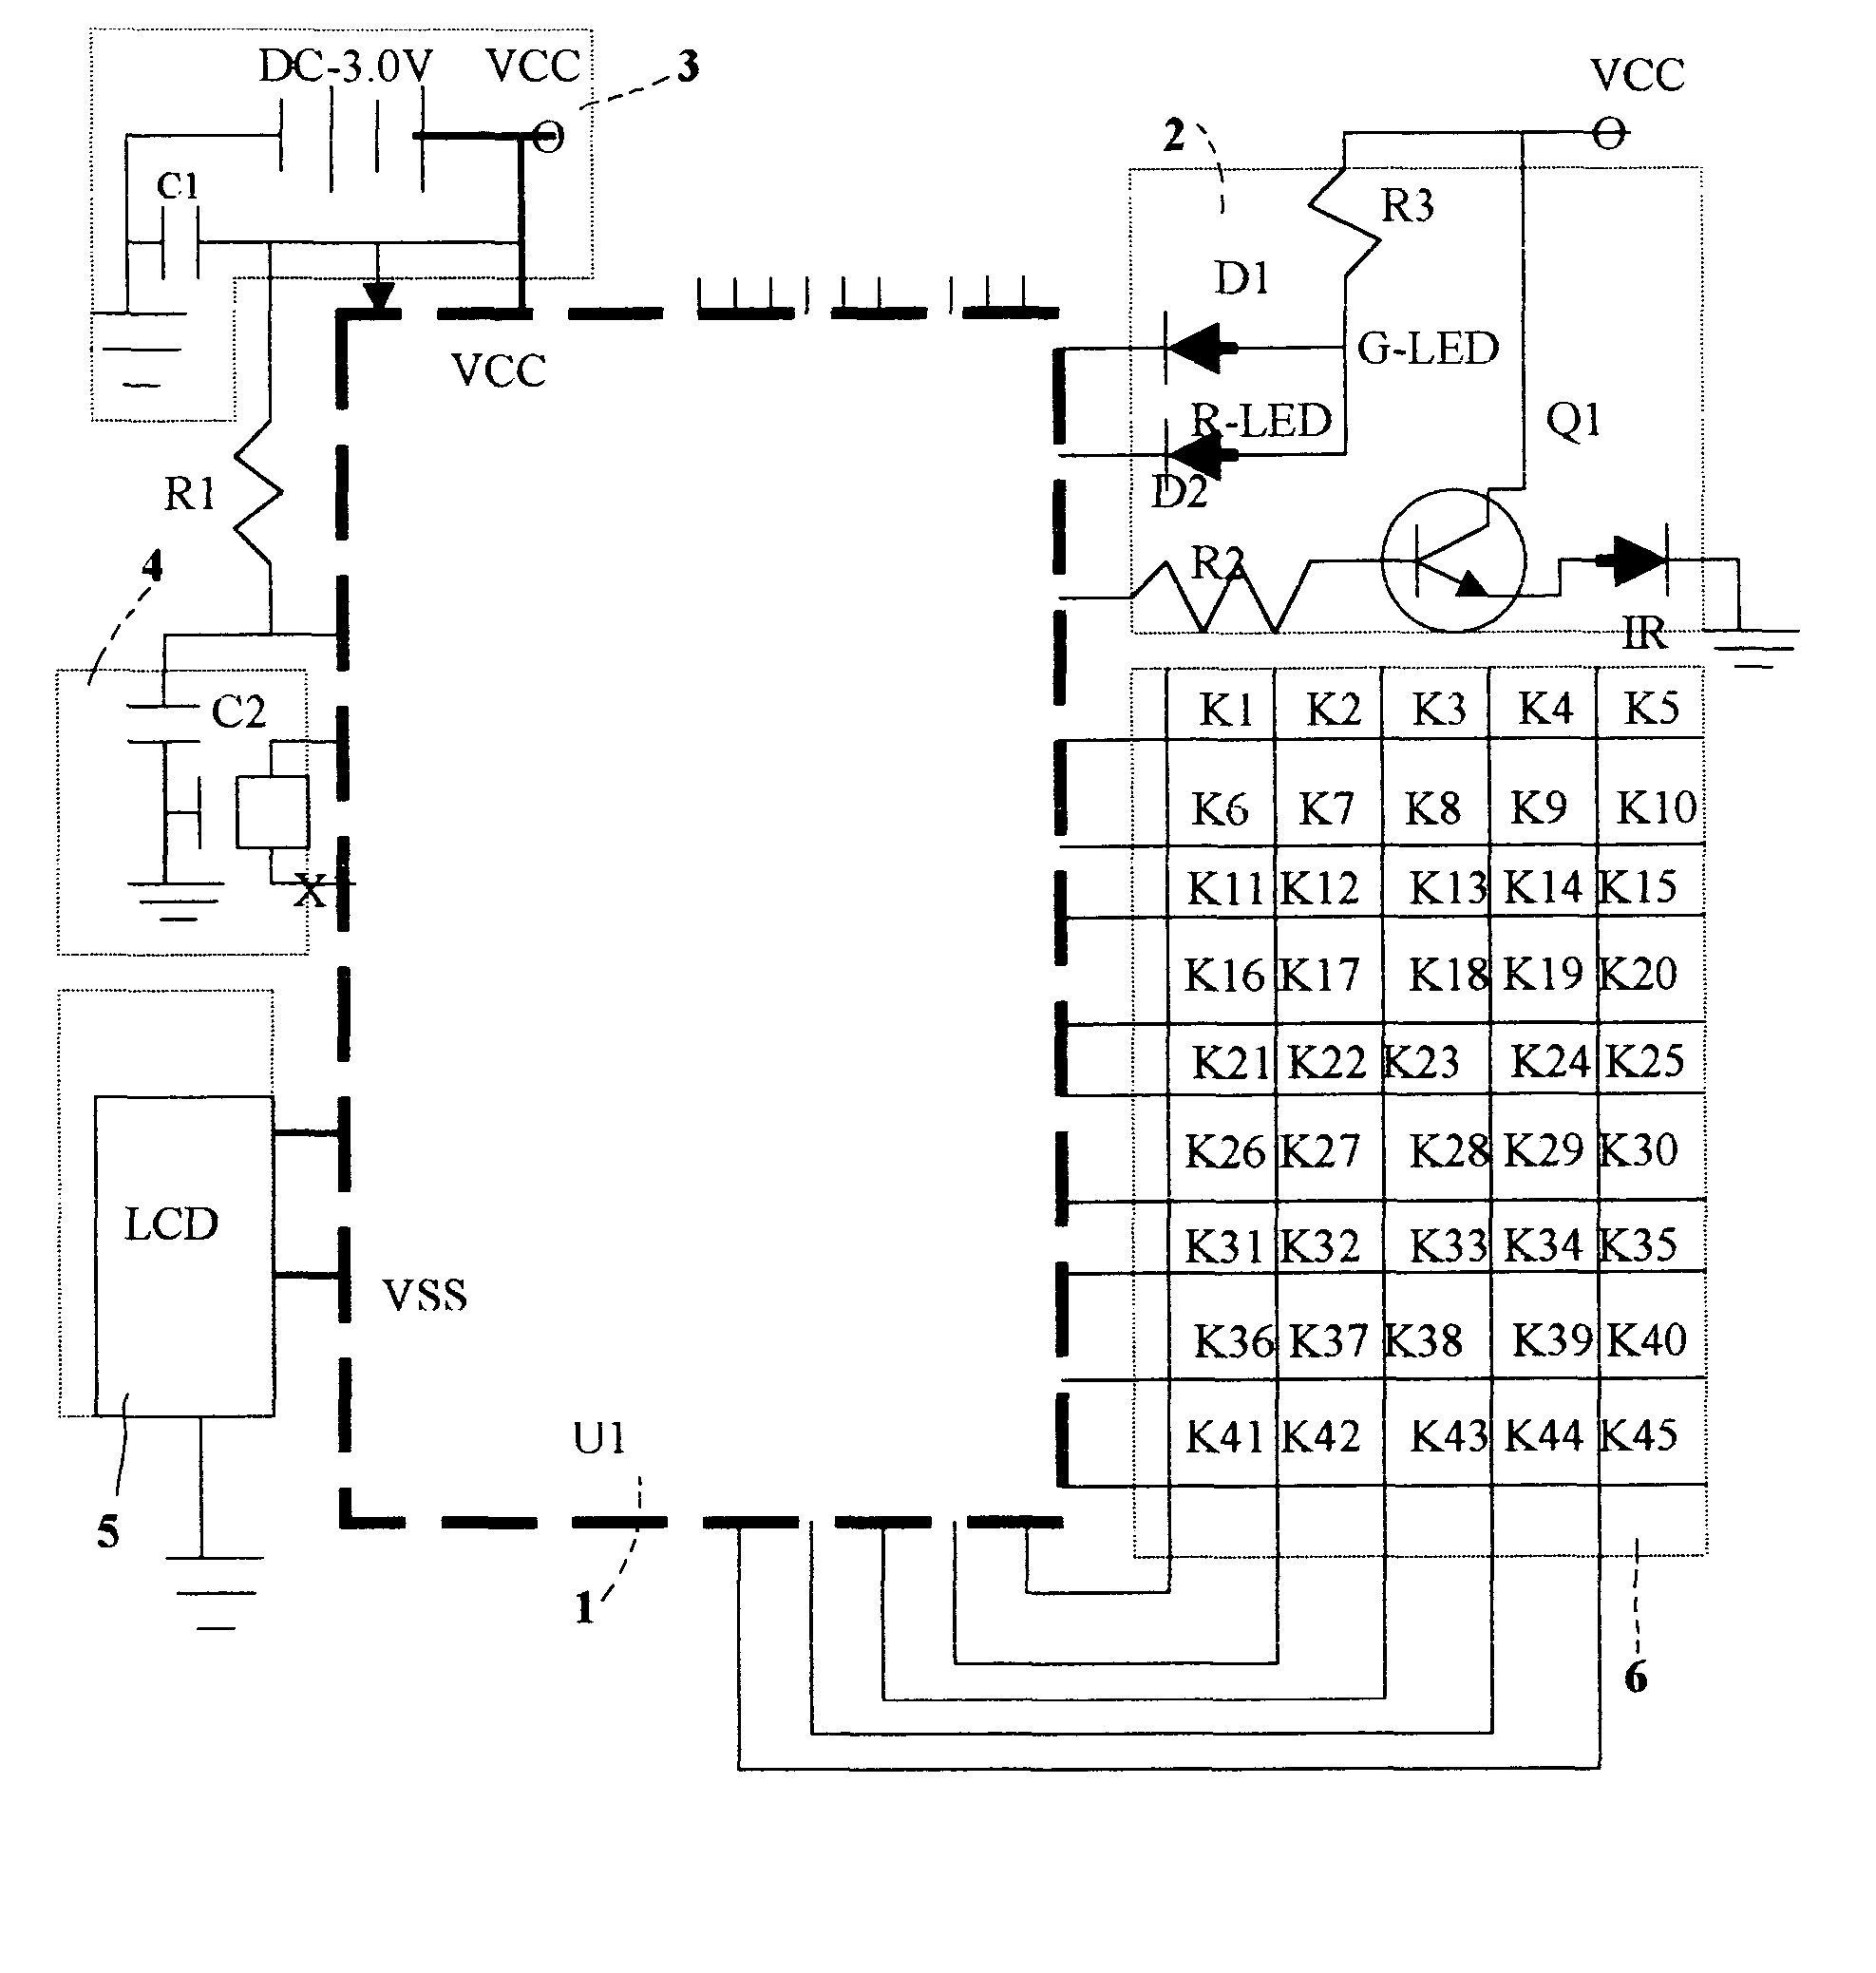 Remote controller having auto-search and timer-controlled emitting functions